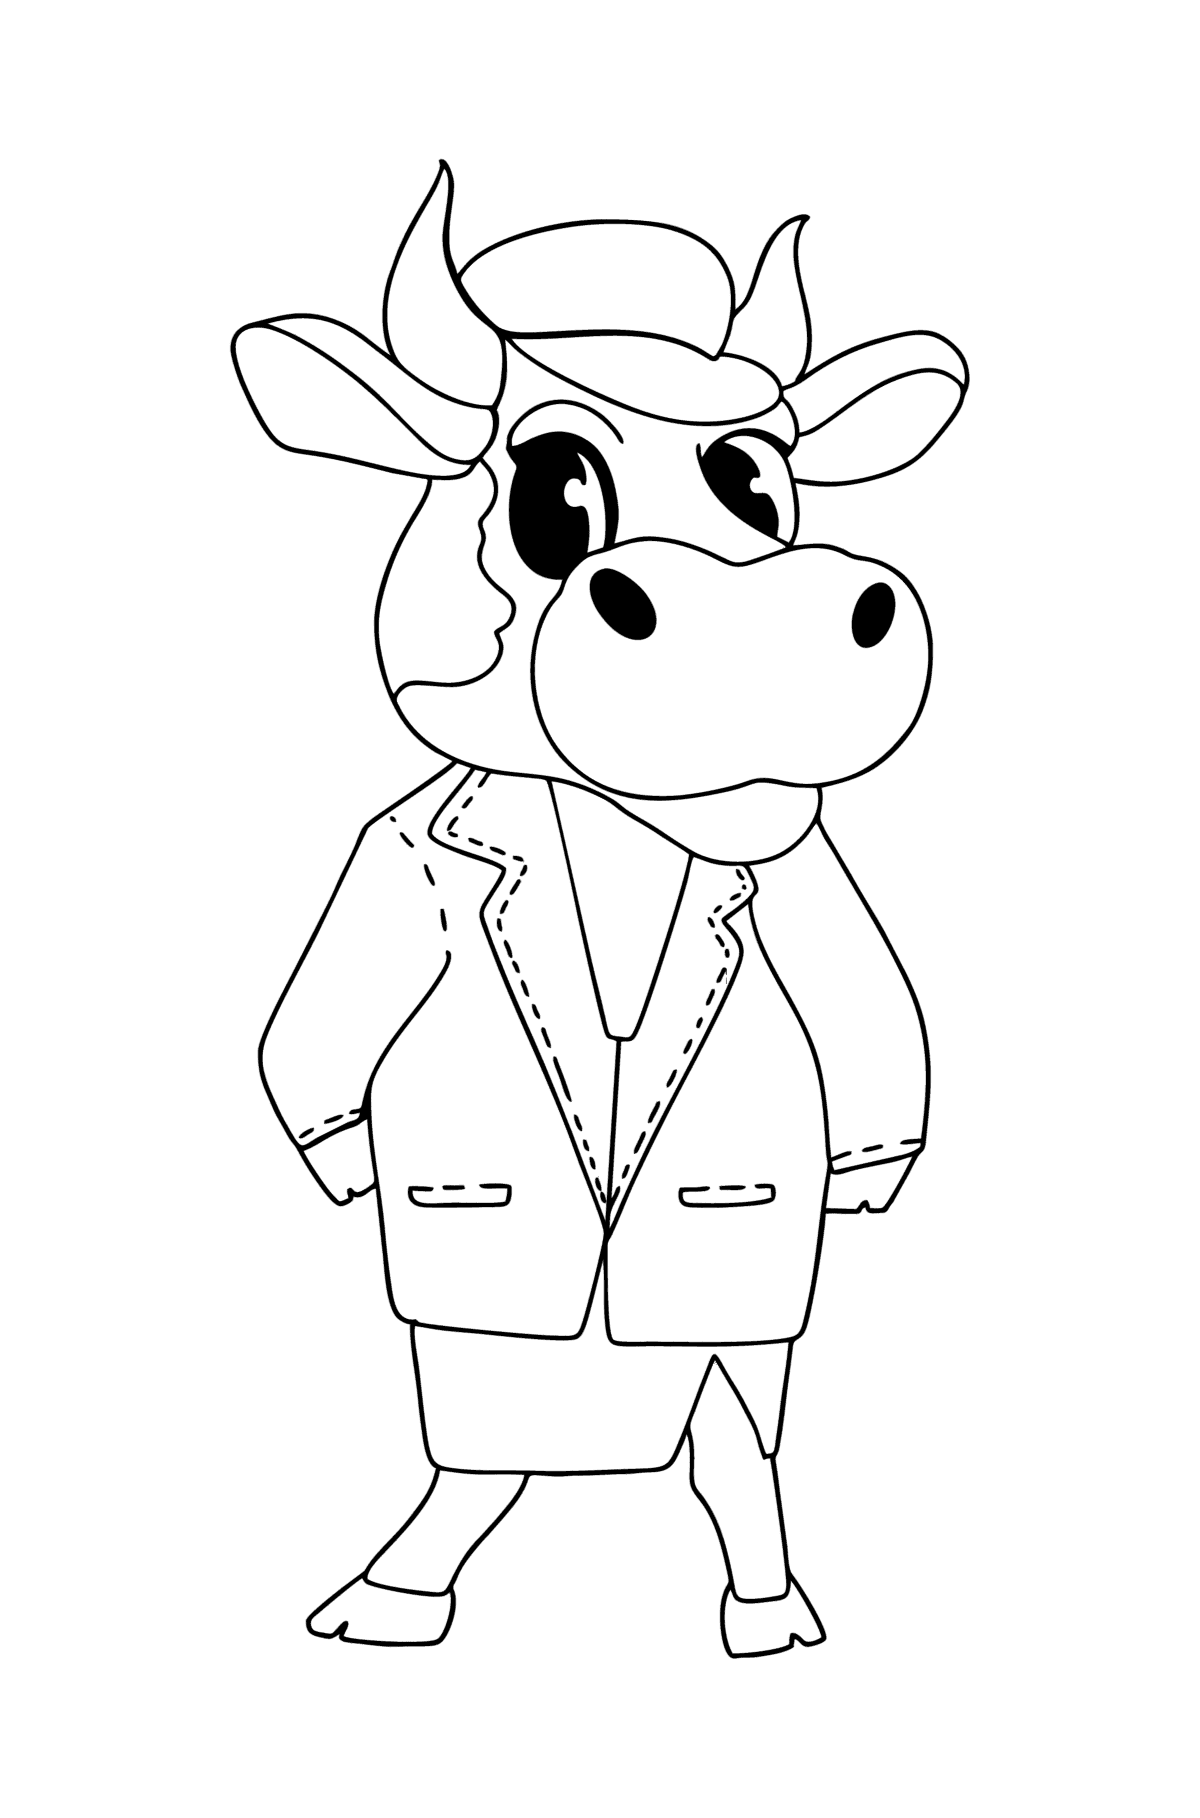 Cartoon cow coloring page - Coloring Pages for Kids